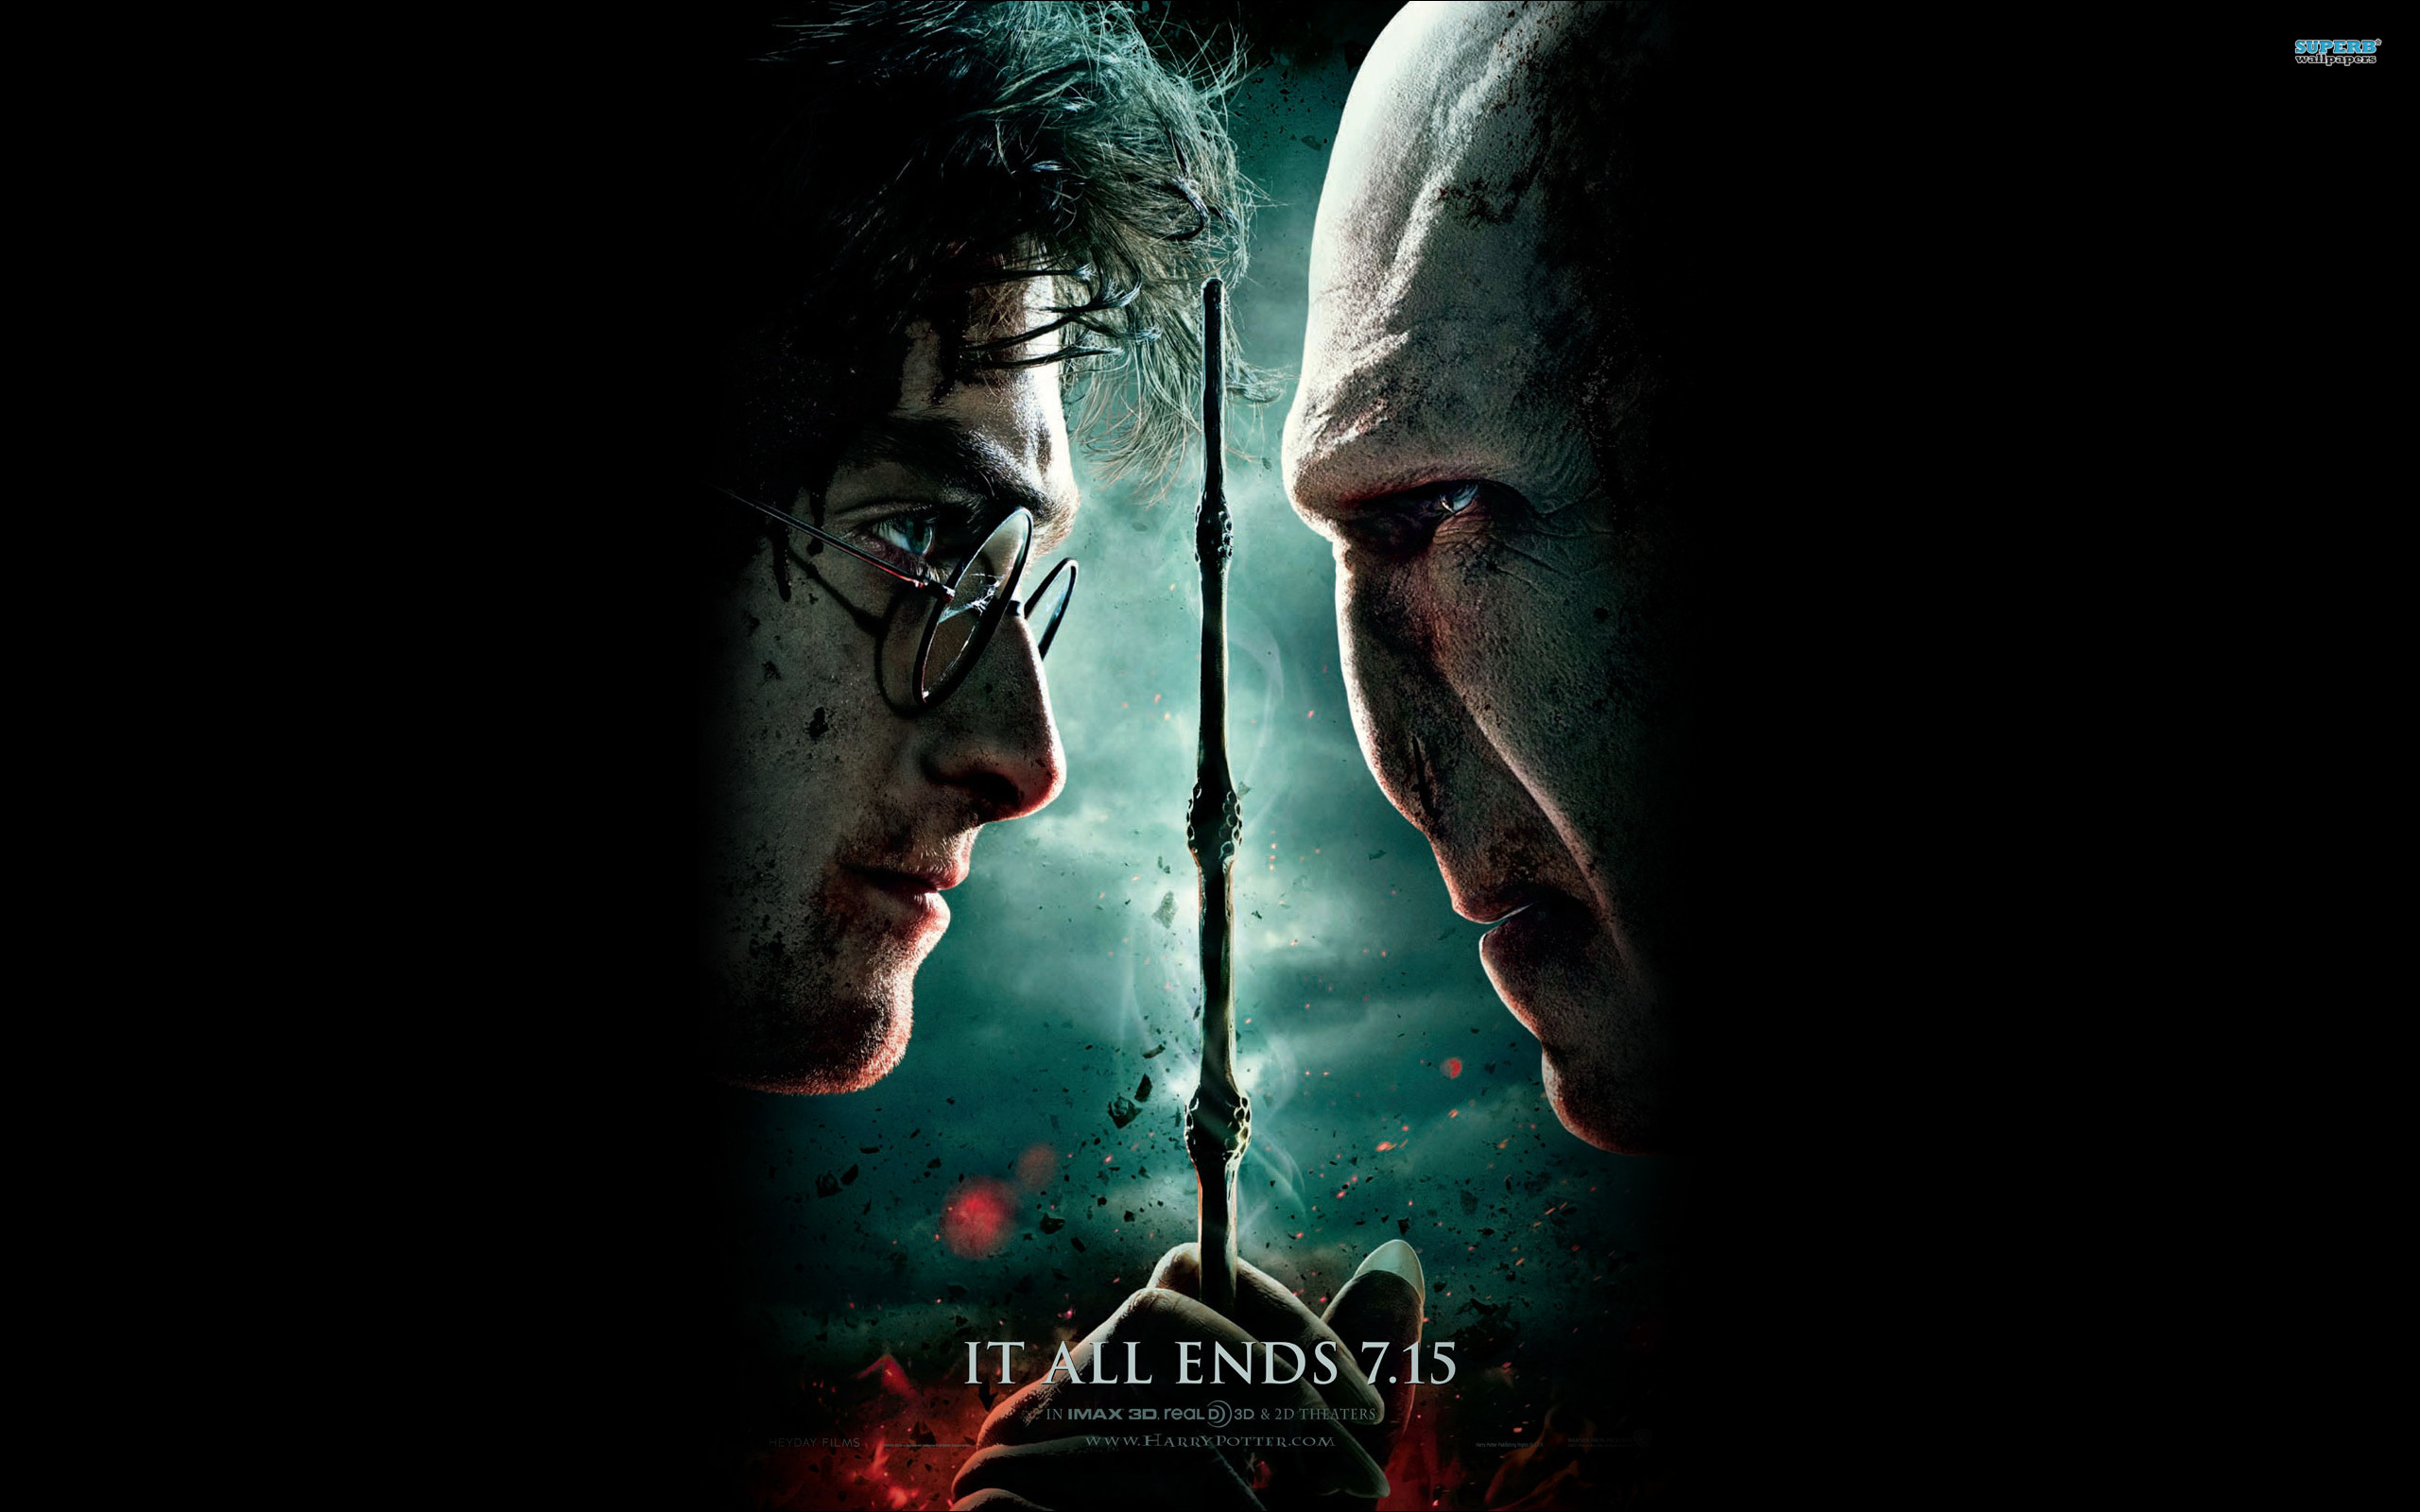 Harry Potter And The Deathly Hallows Part 2 Wallpapers - Wallpaper